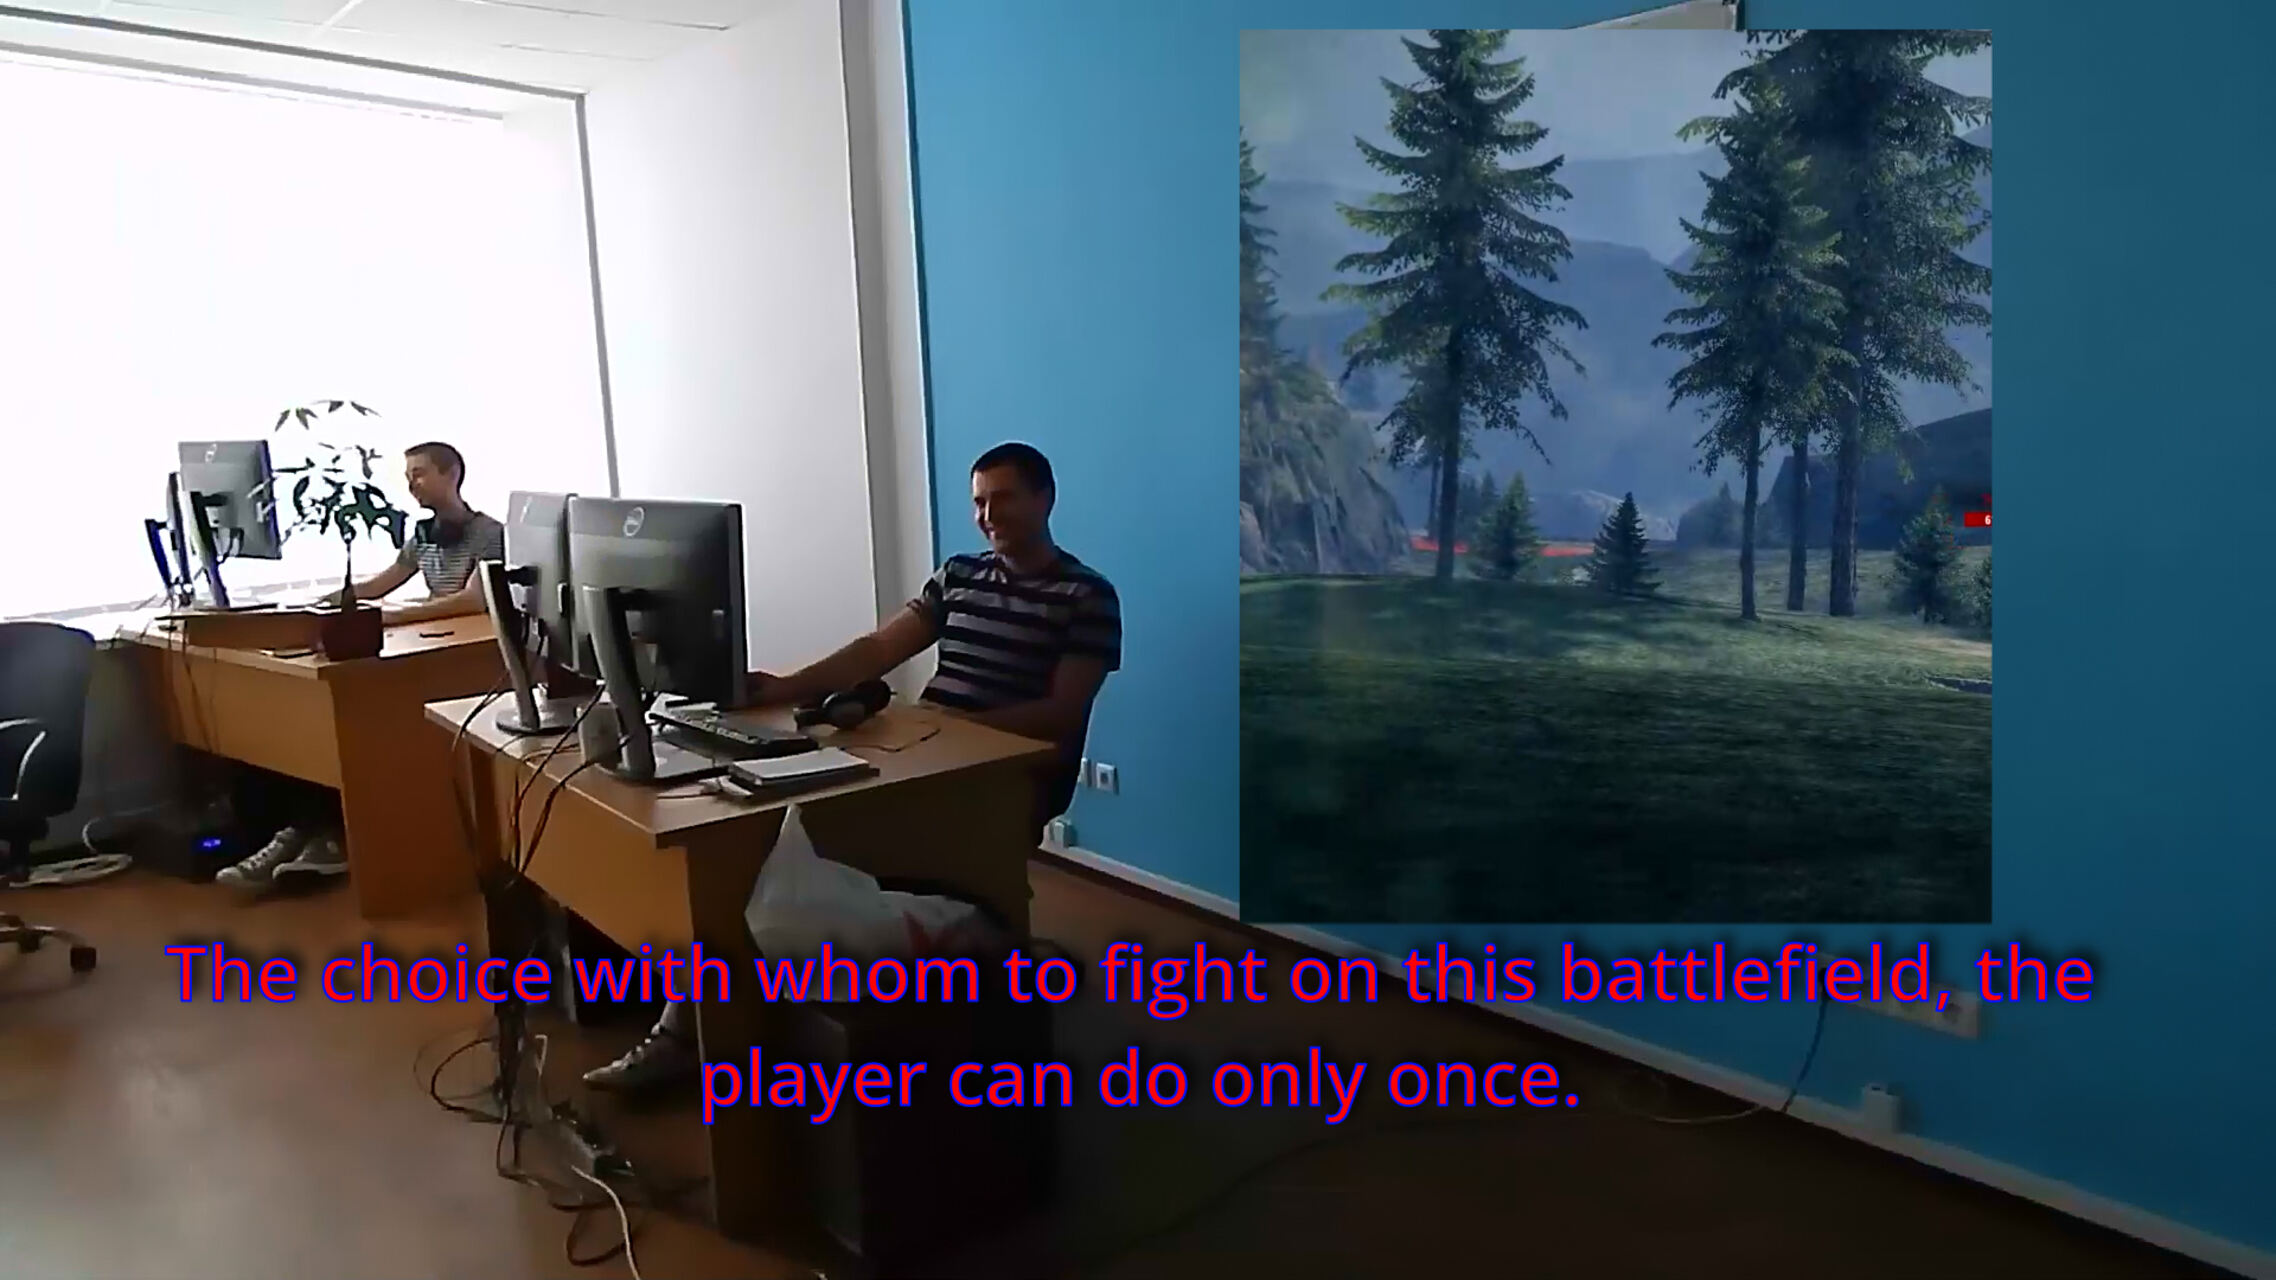 The choice with whom to fight on this battlefield, the player can do only once